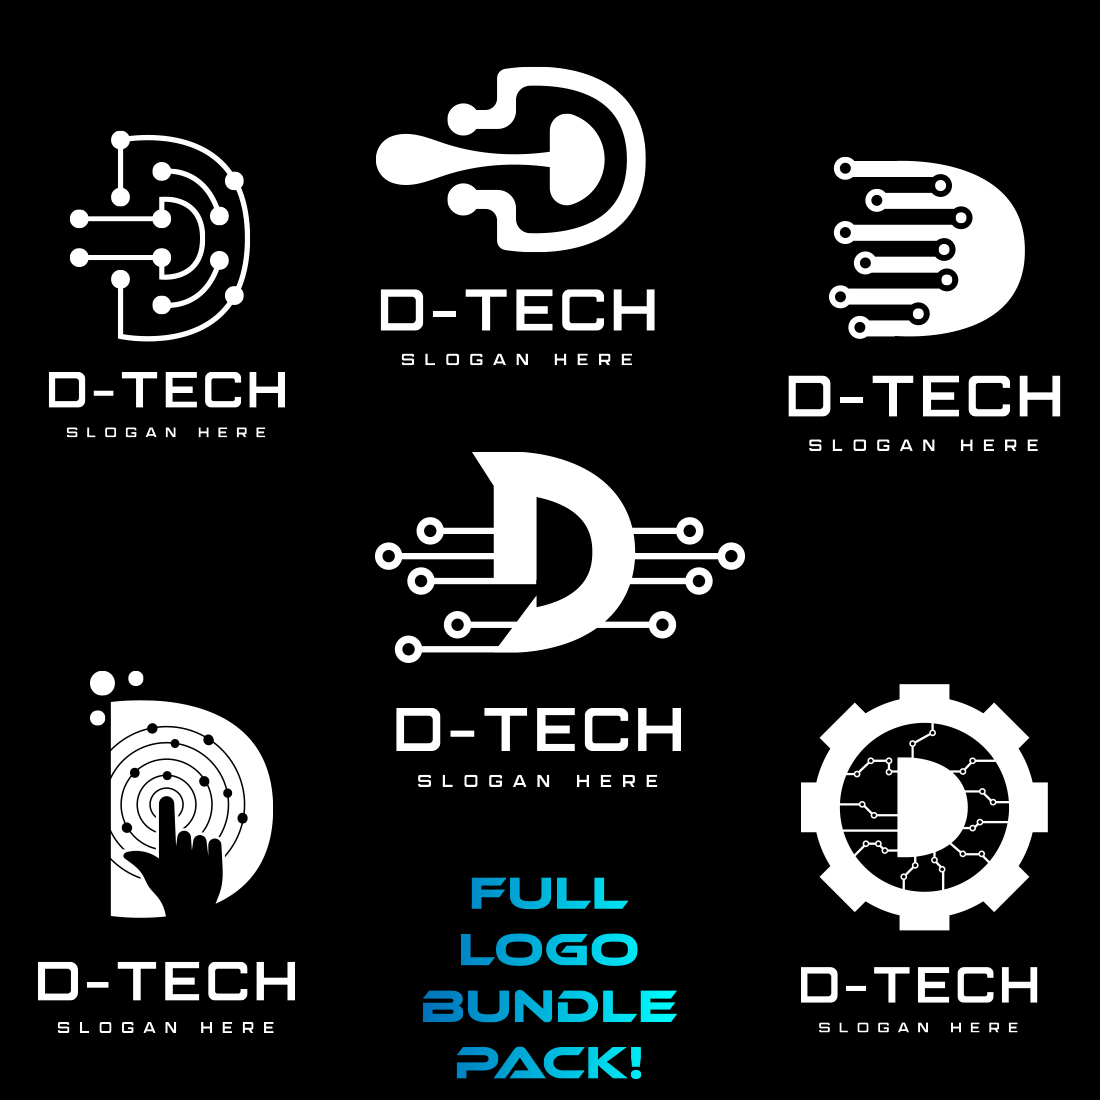 Exclusive Logo Bundle of D-Technology cover image.